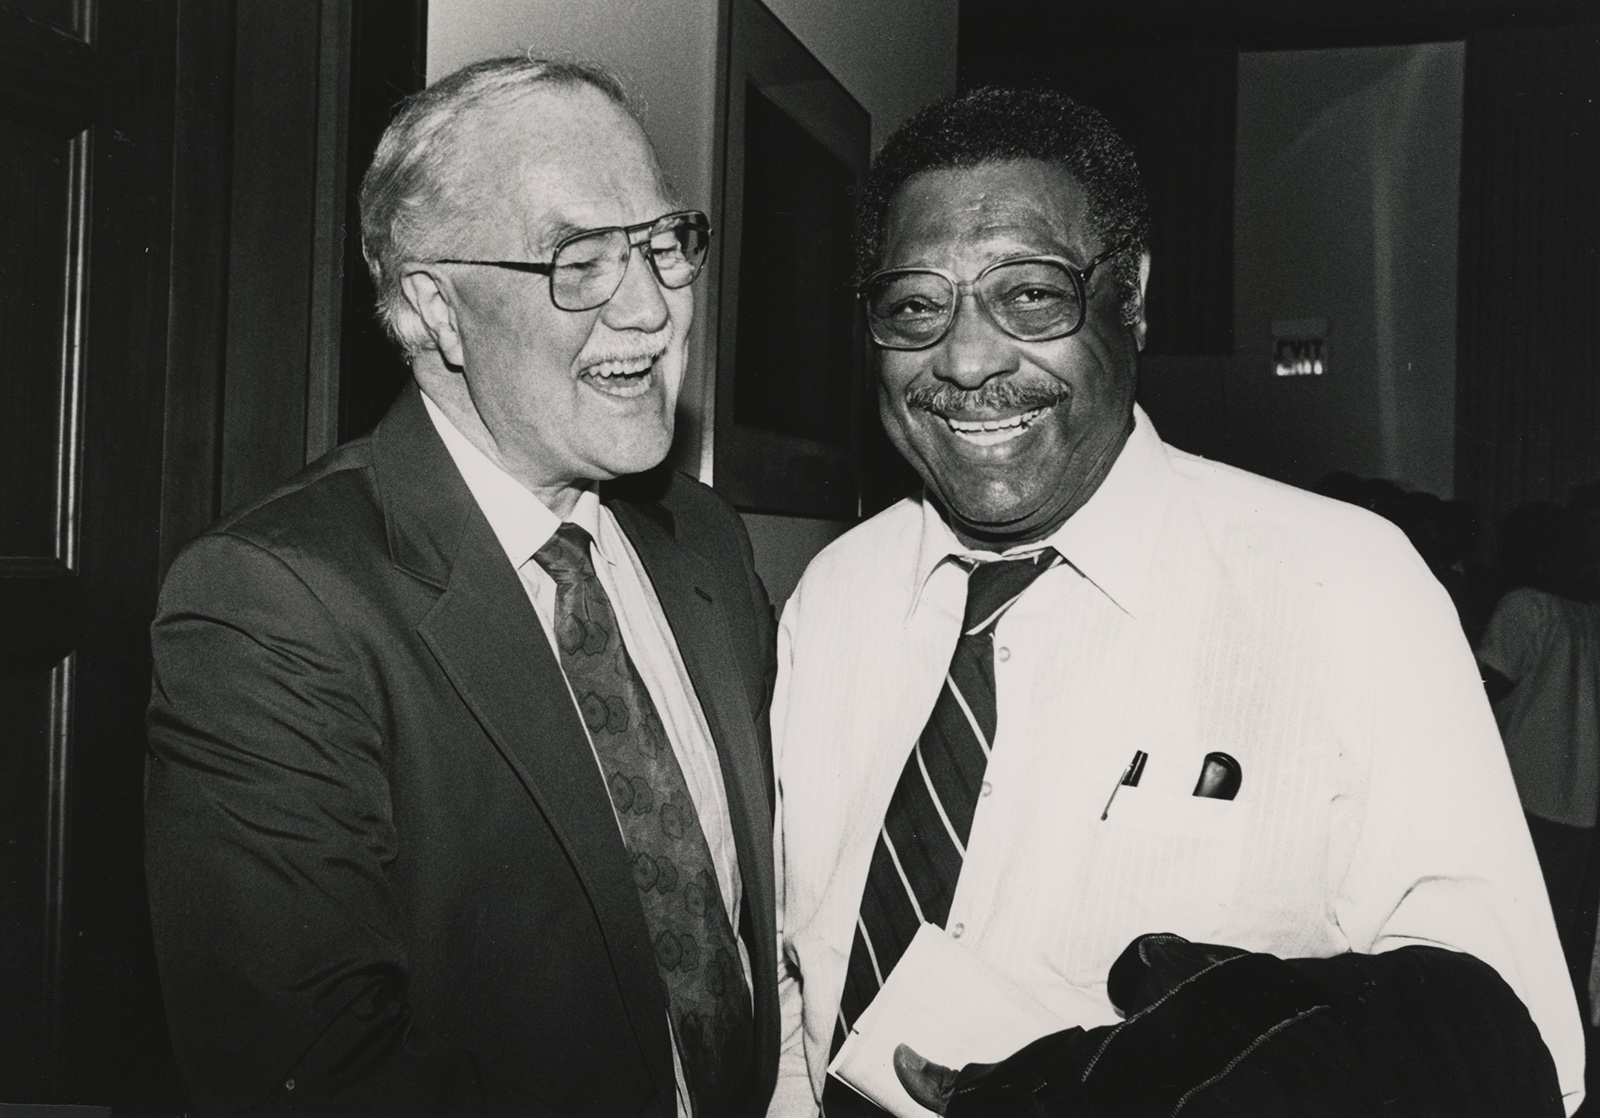 Two smiling men, one white, one Black, in a black and white photo taken at a reception